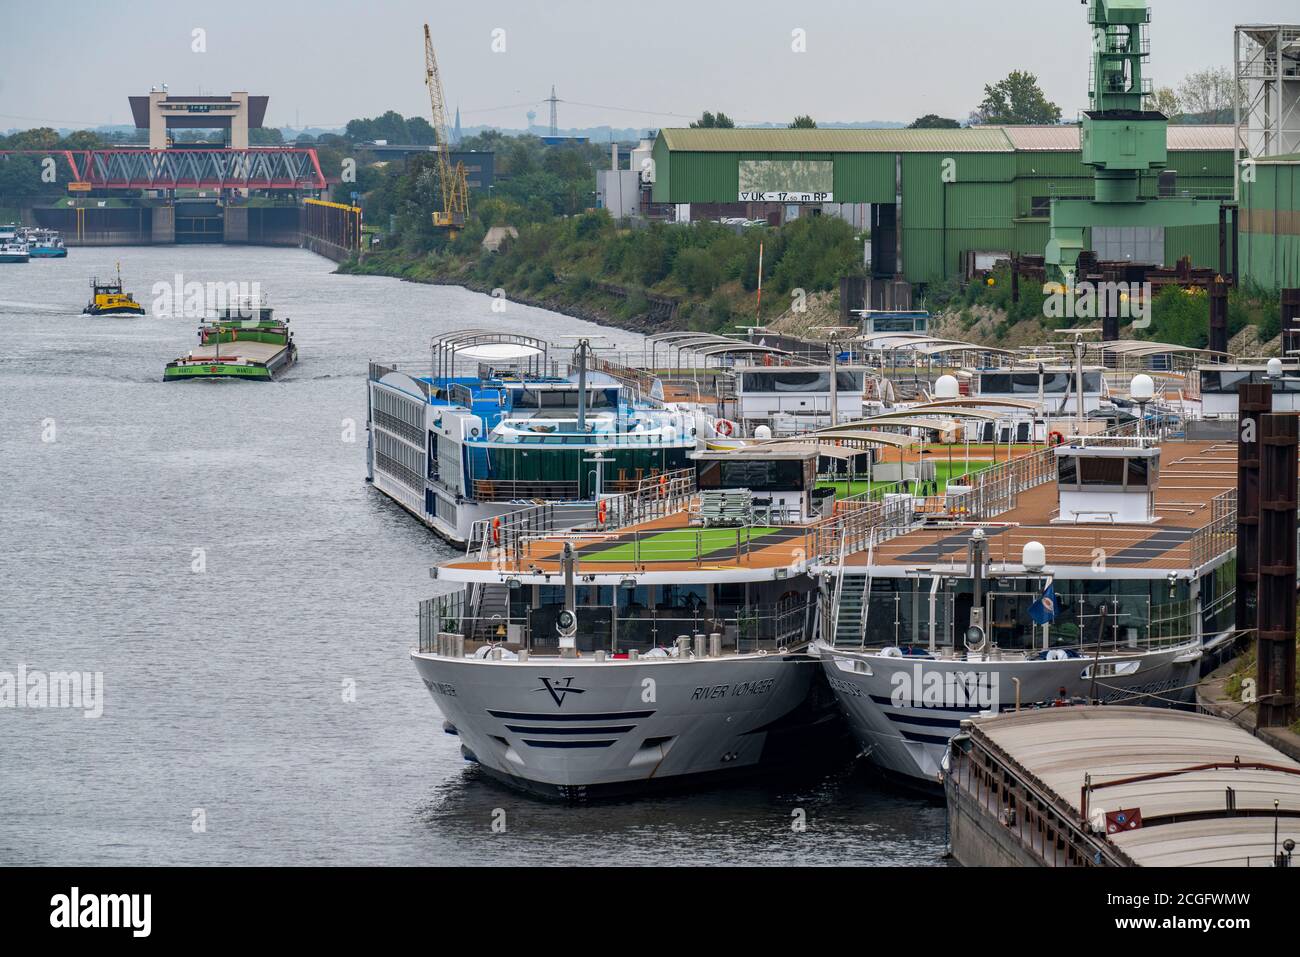 River cruise ships of various shipping companies are anchored in Duisburg's Ruhrort Port, they are not needed due to declining passenger numbers durin Stock Photo